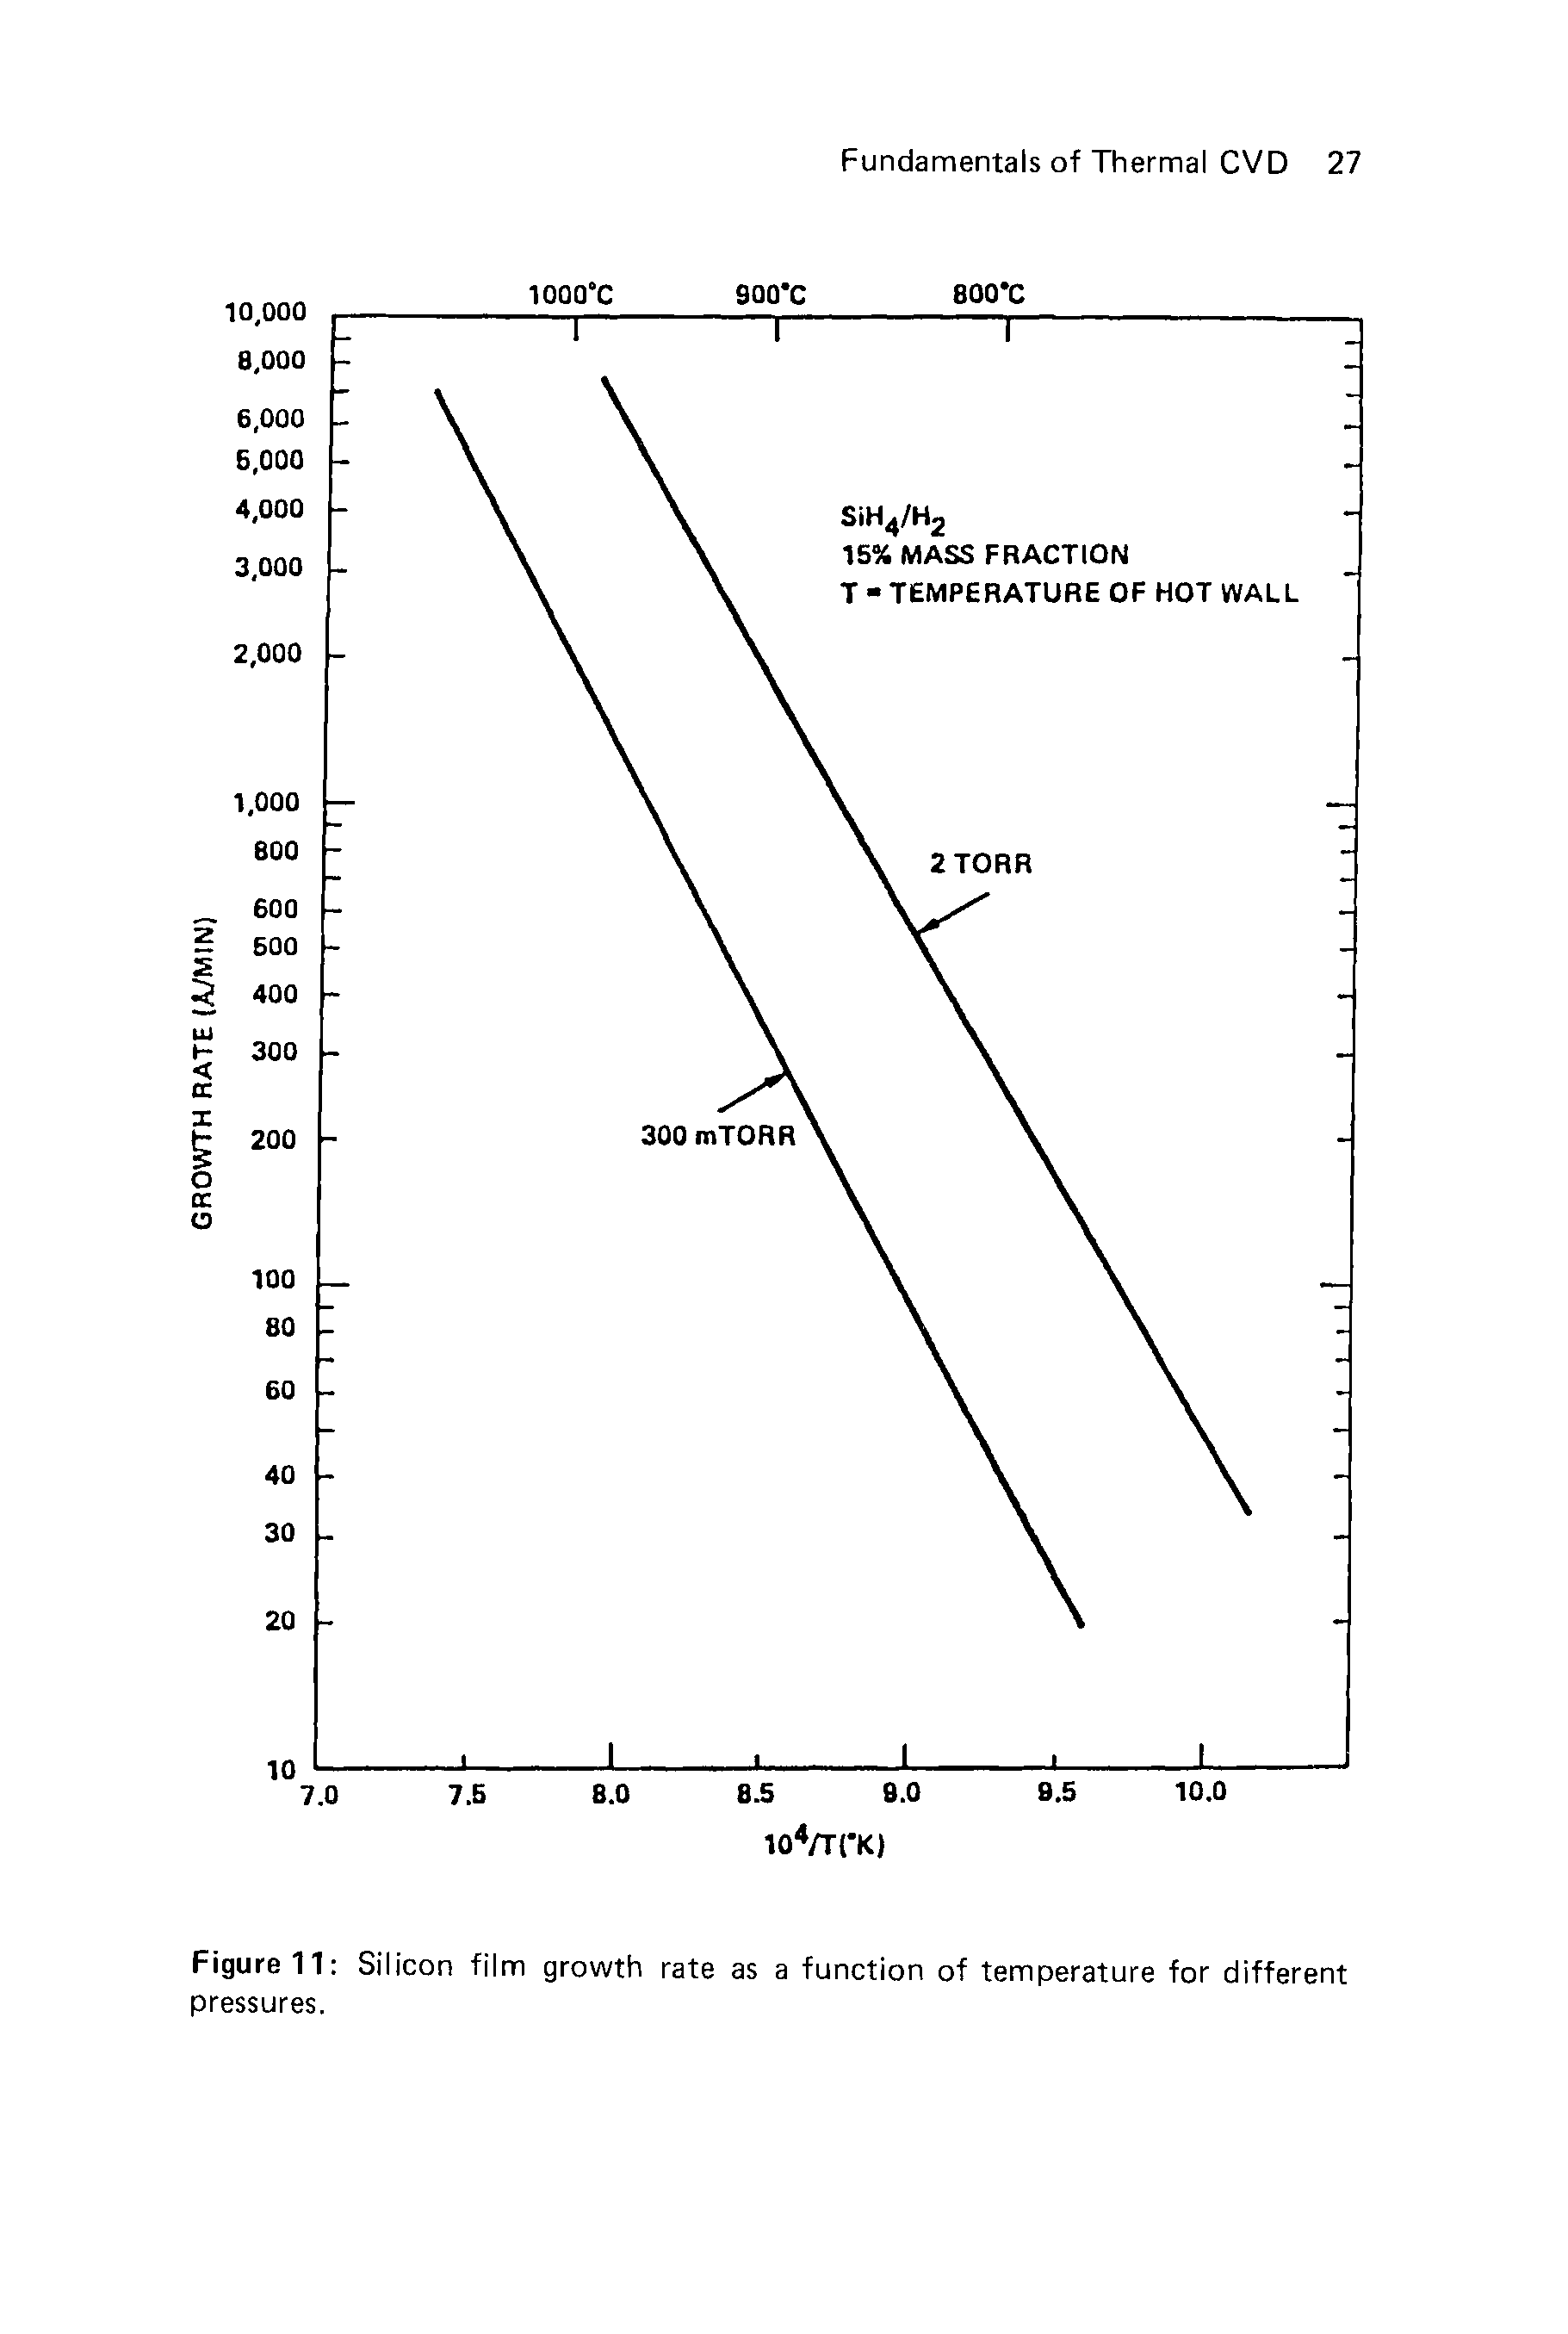 Figure 11 Silicon film growth rate as a function of temperature for different pressures.